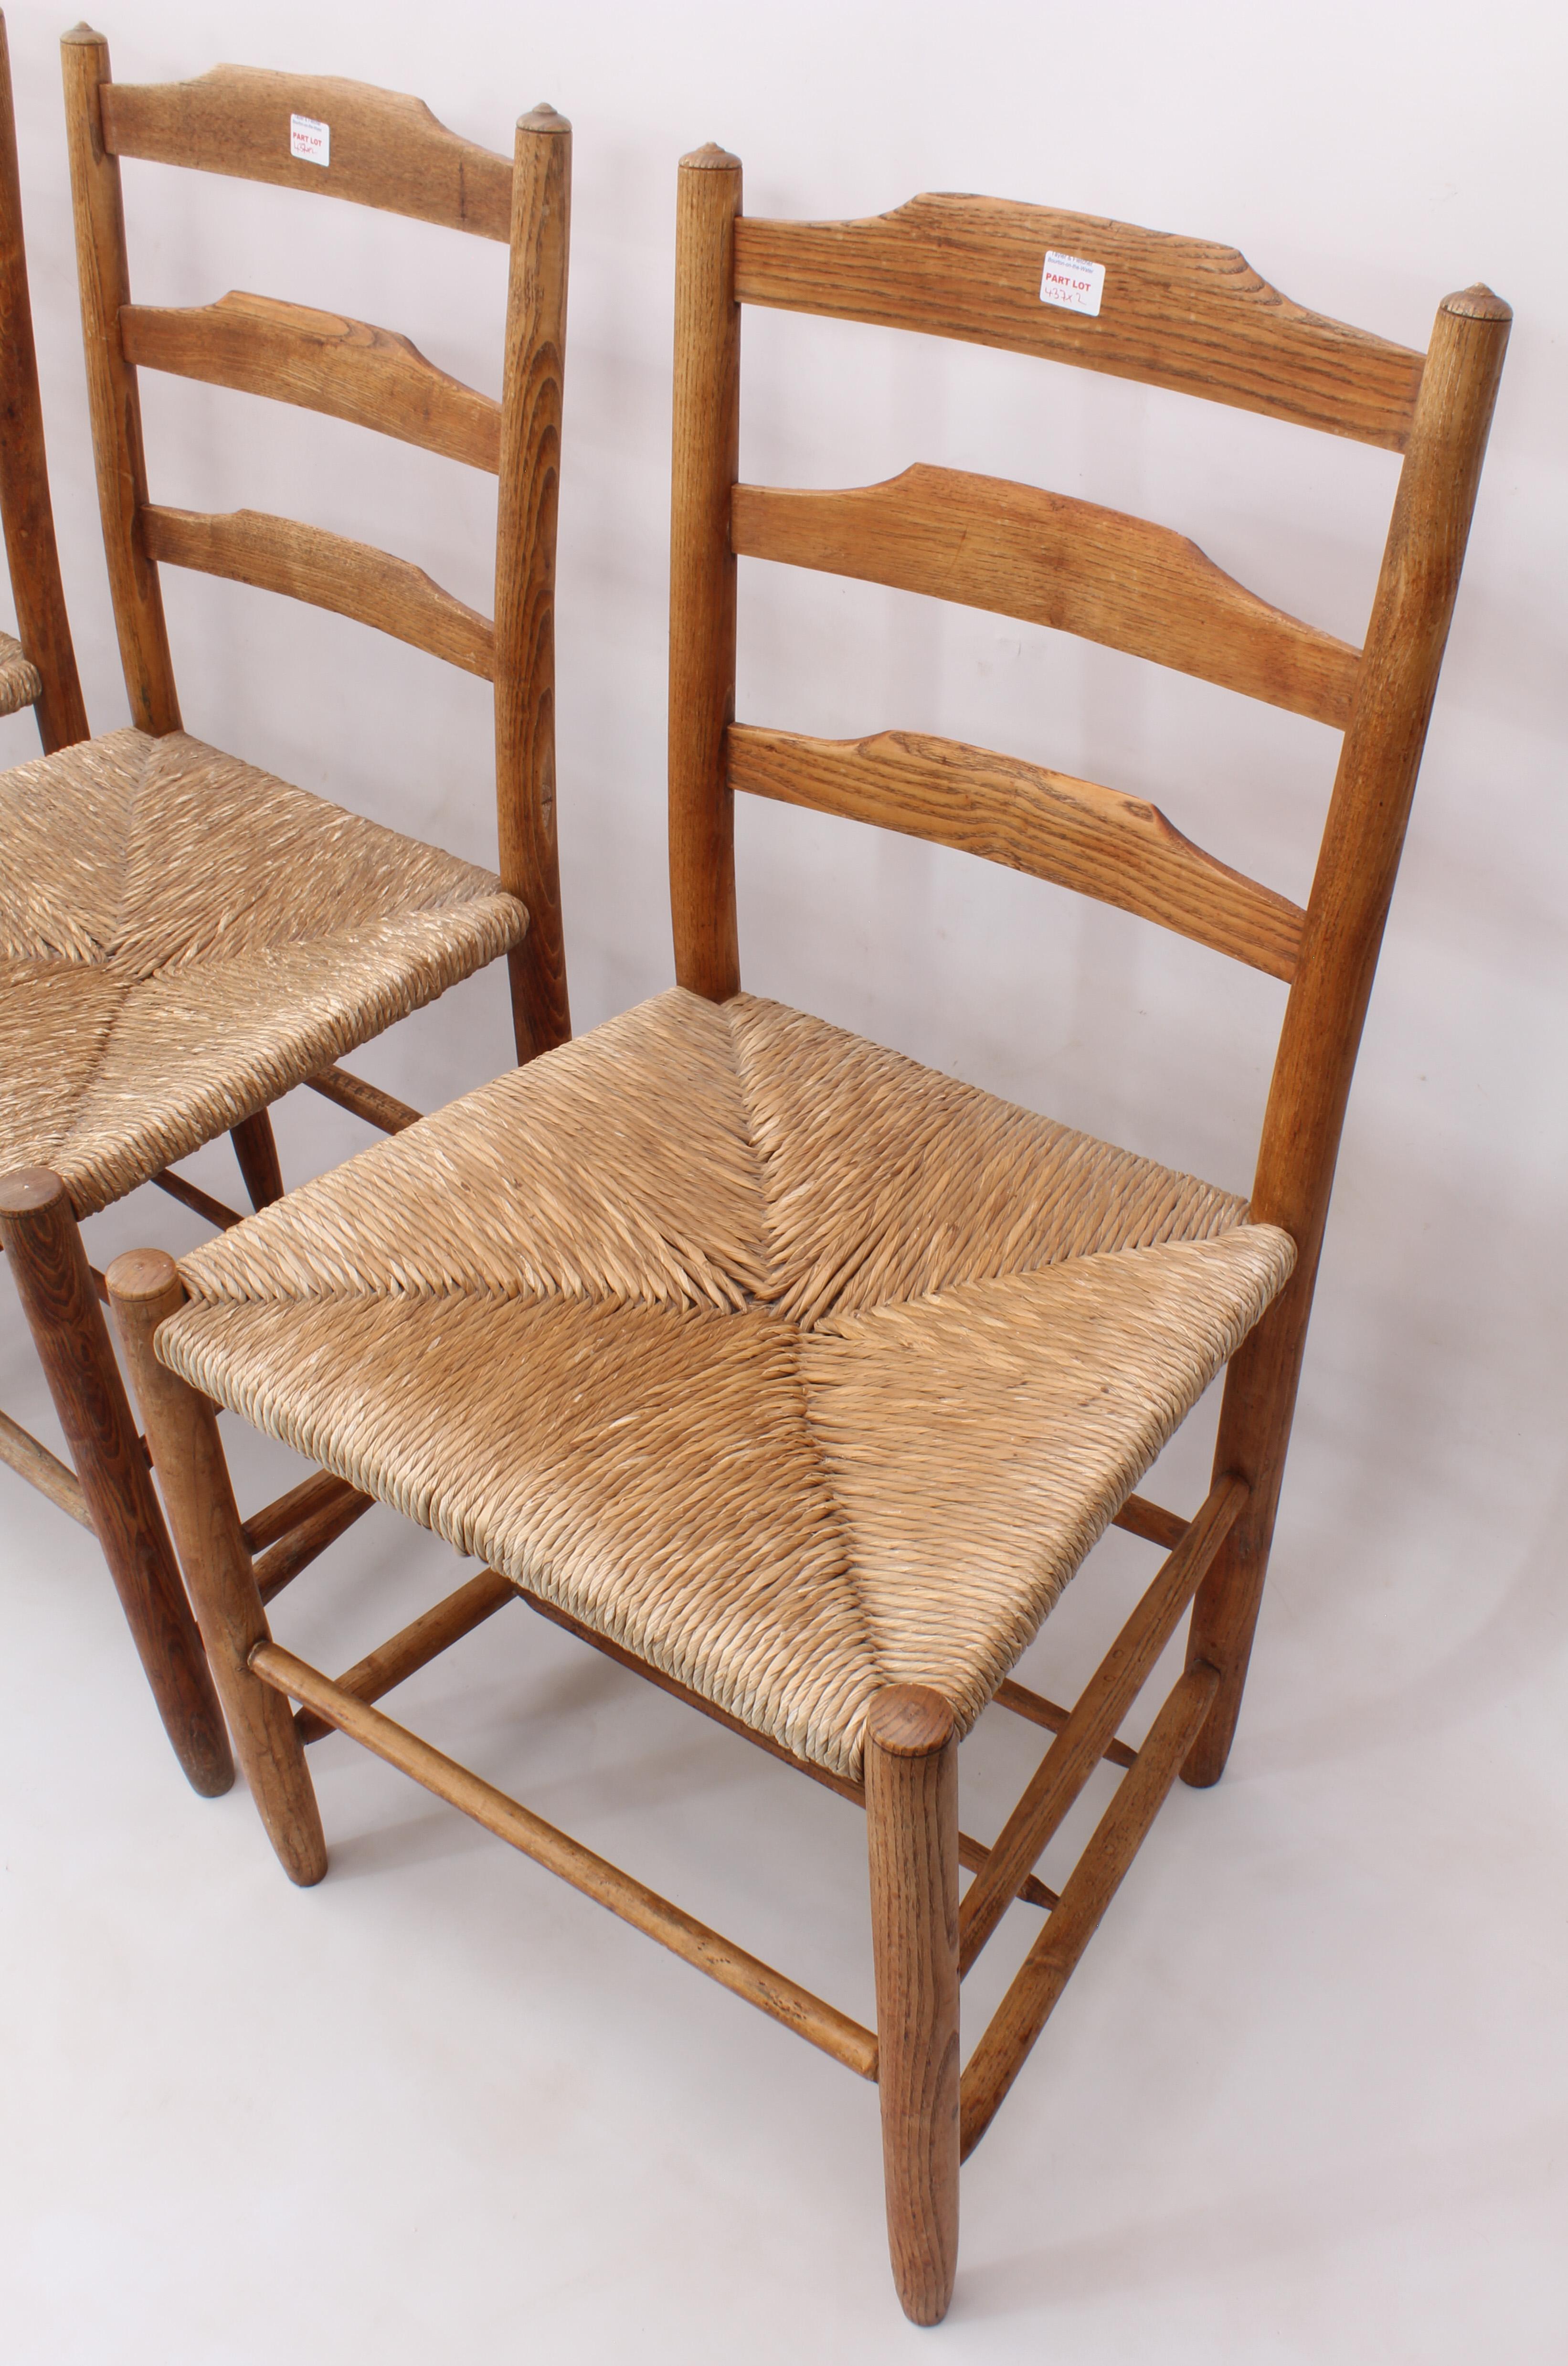 Three Cotswold School 19th century ash and elm ladderback chairs in the style of Philip Clissett - - Image 3 of 3